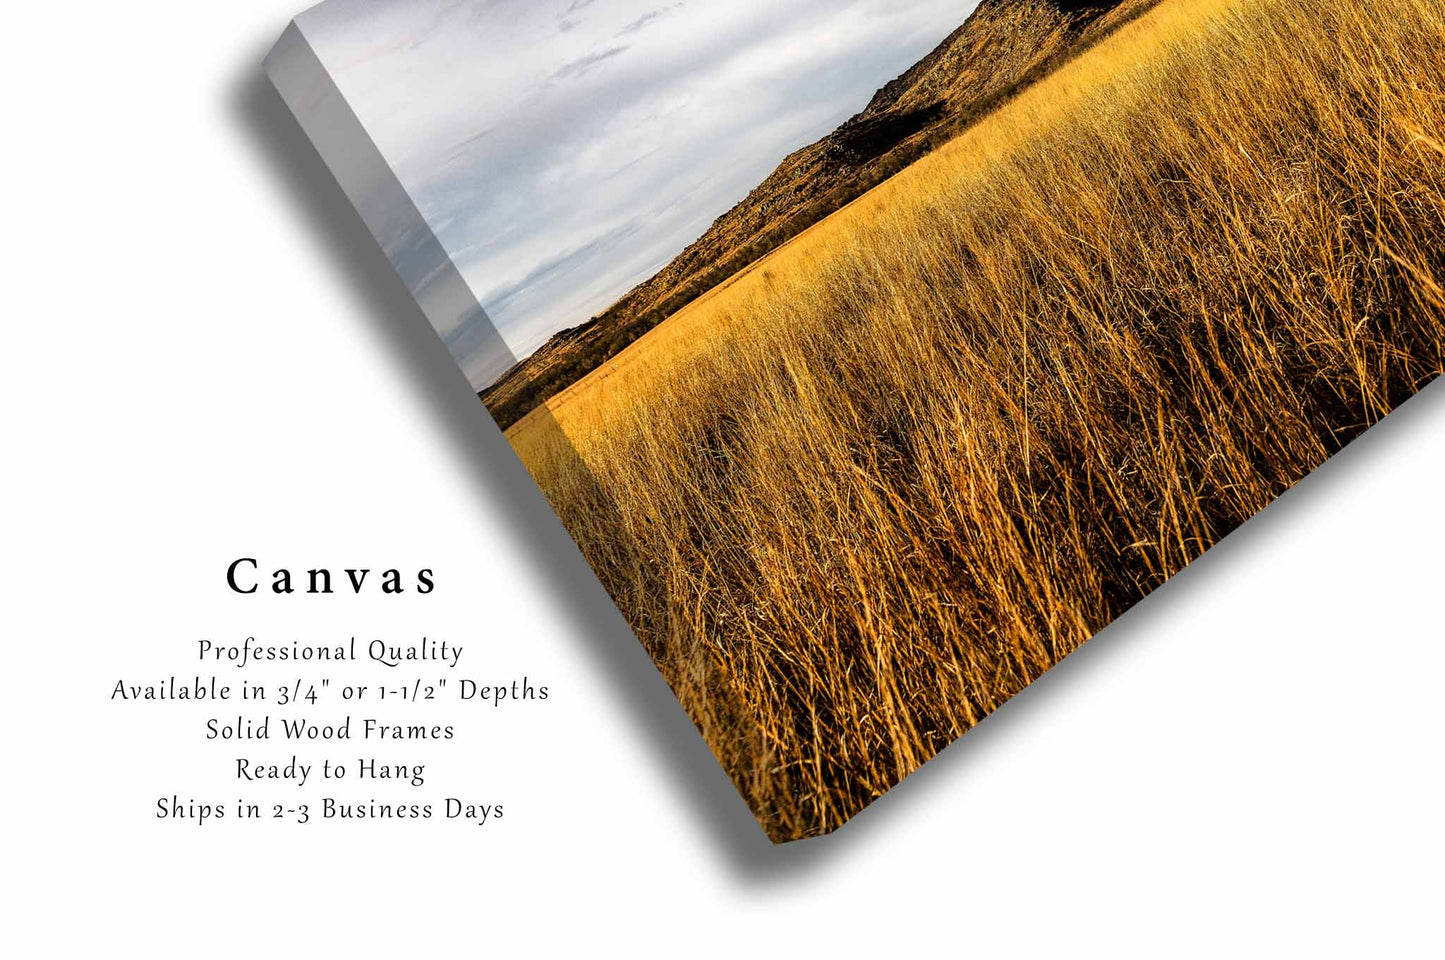 Wichita Mountains Canvas Wall Art (Ready to Hang) Gallery Wrap of Mountain Overlooking Golden Prairie Grass on Autumn Day in Oklahoma Great Plains Photography Nature Decor